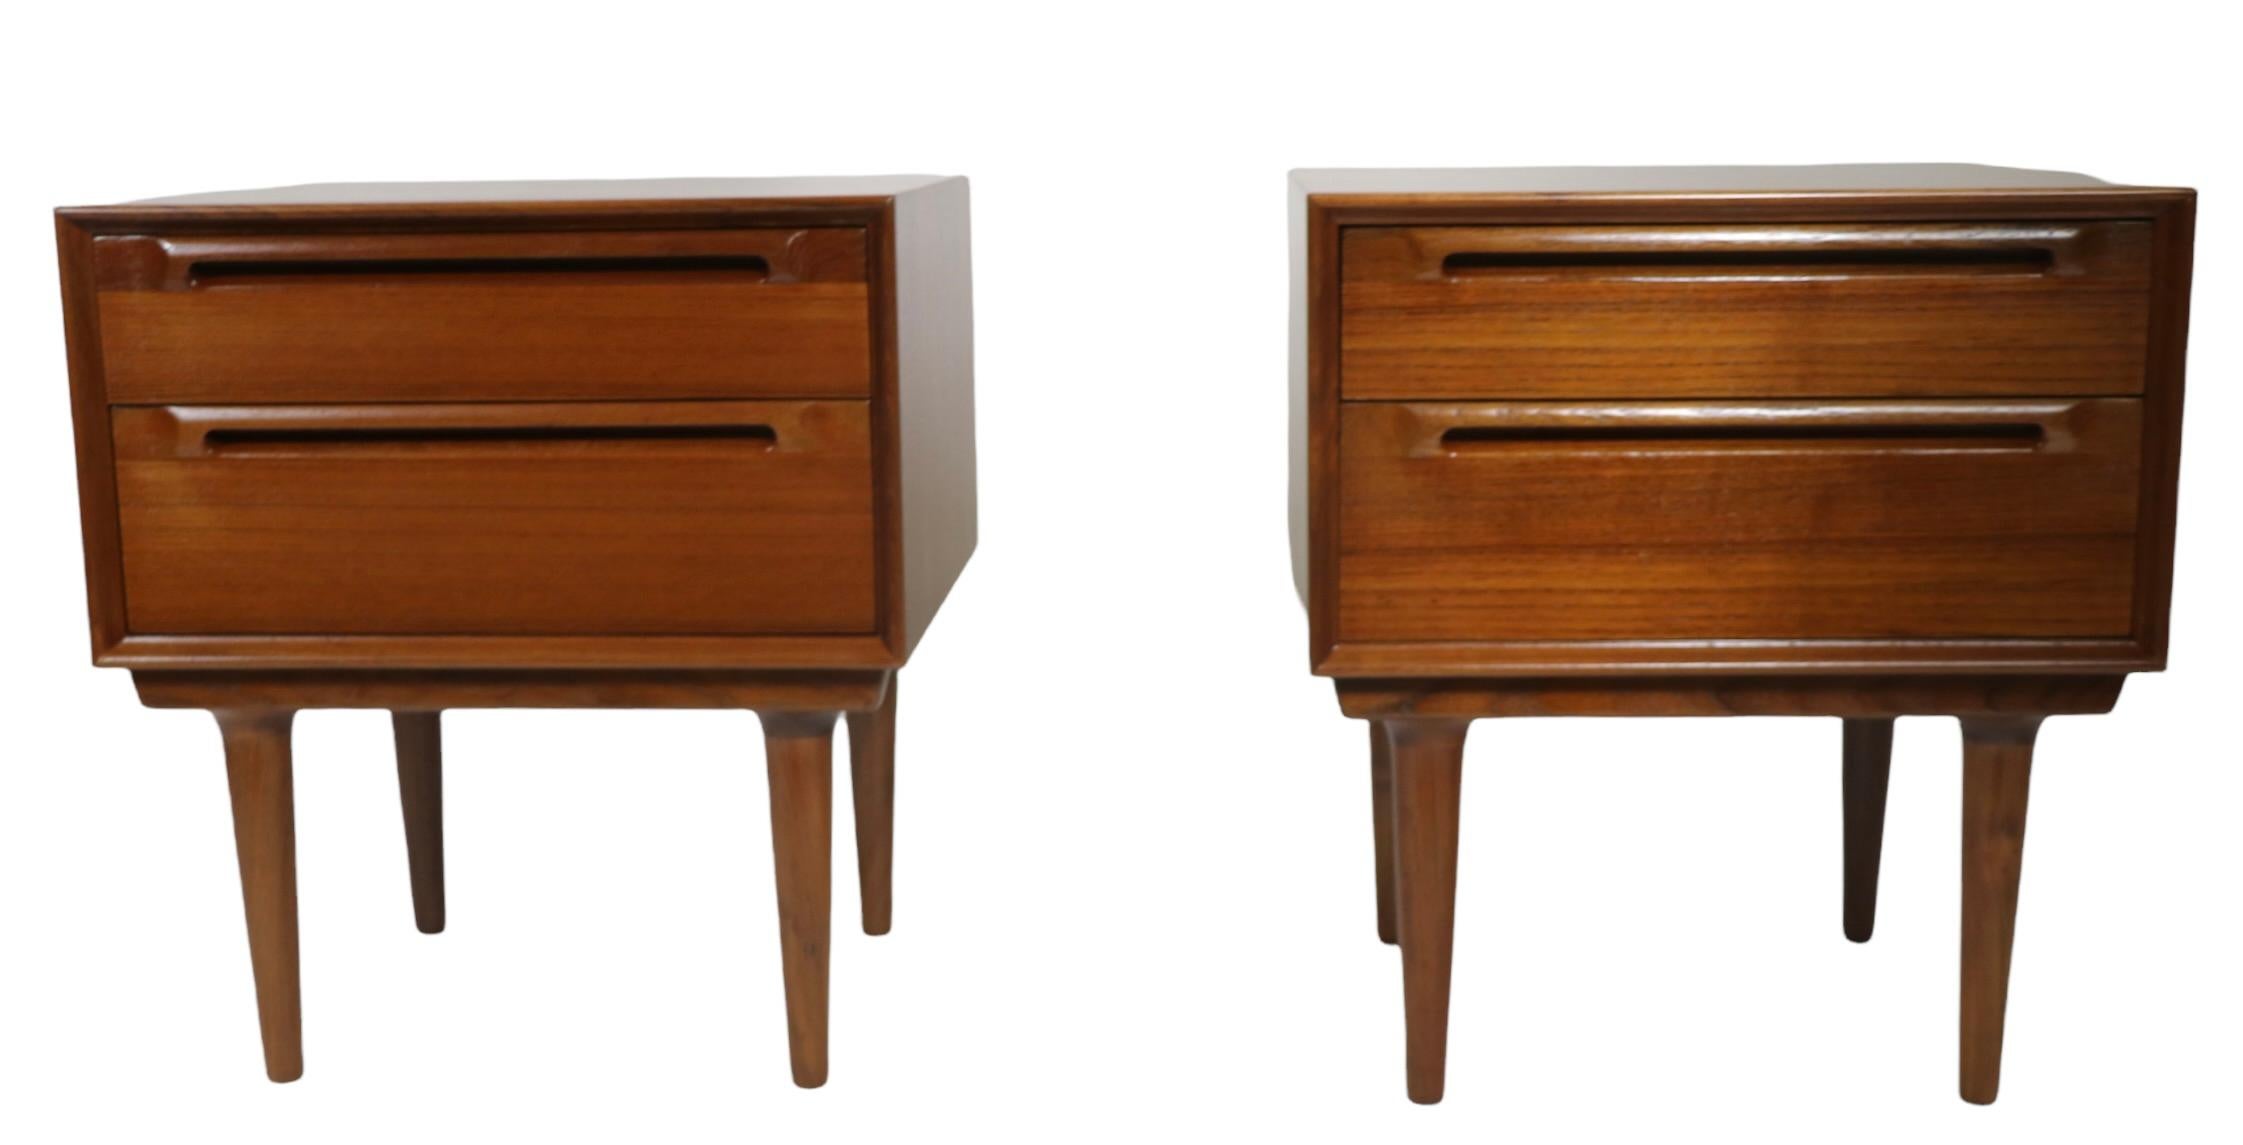 Exceptional pair of Danish Mid-Century Modern night stands, attributed to Sven Ellekaer. The nightstands feature two drawers, the lower drawer being deeper than the upper drawer. Both are in exceptional condition, having been newly professionally